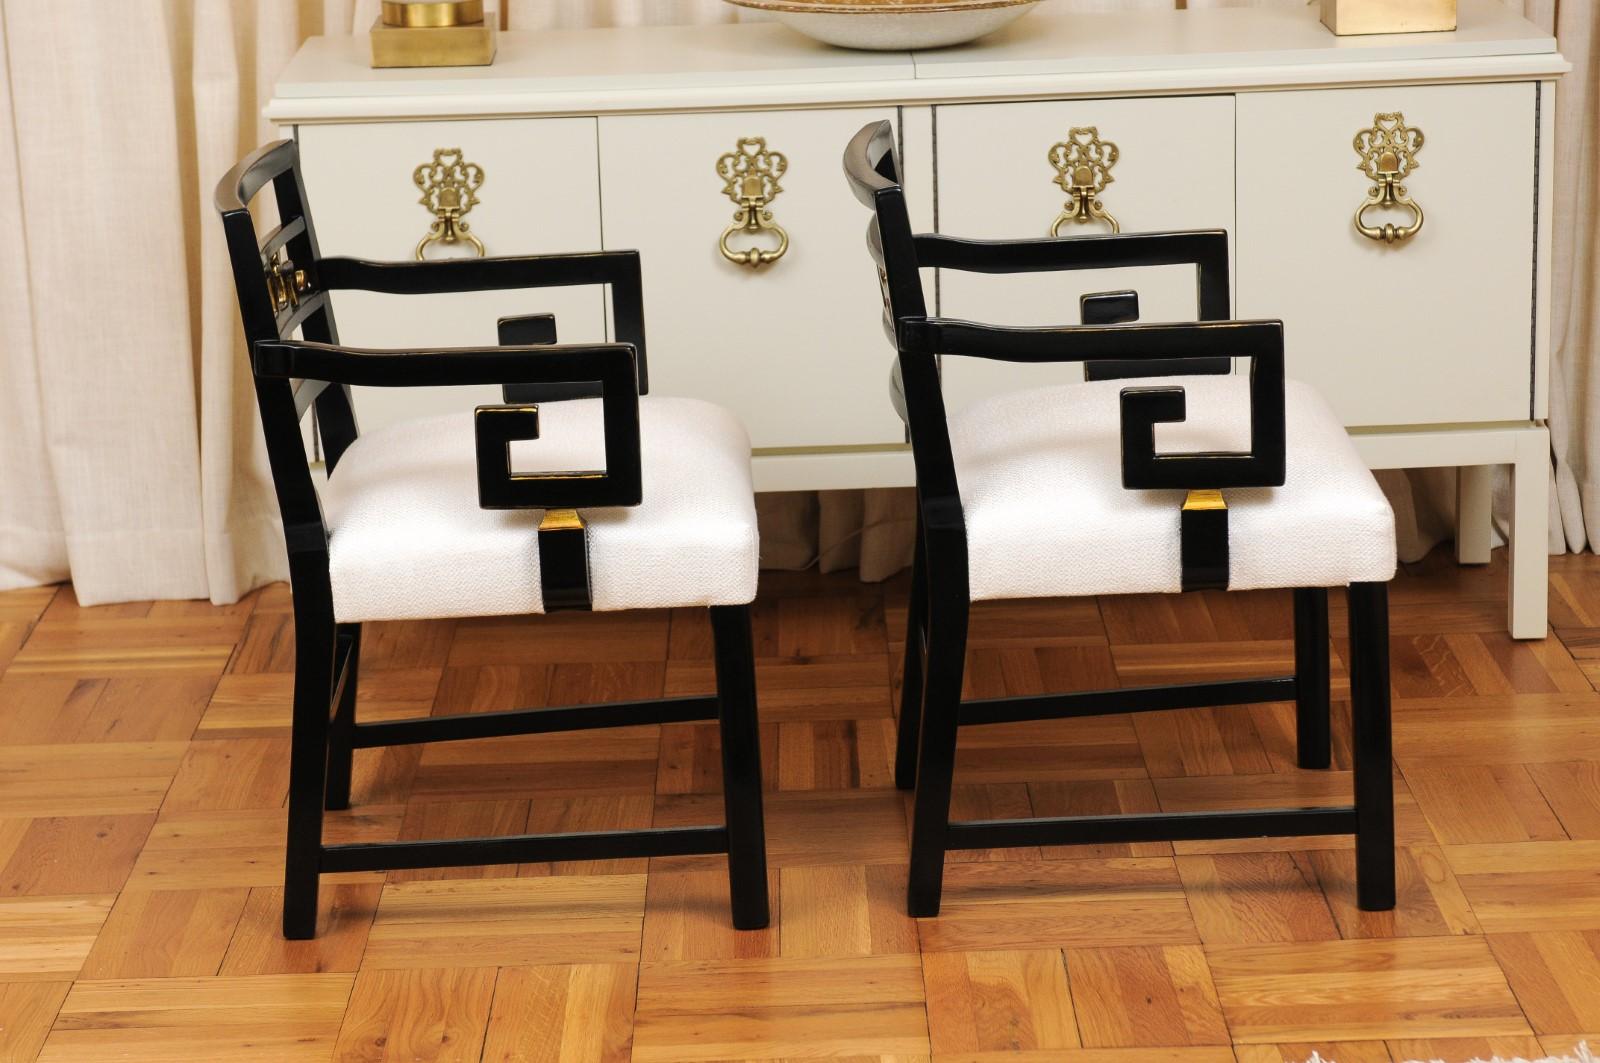 Exquisite Pair of Modern Chinoiserie Greek Key Armchairs by Baker, circa 1960 For Sale 1